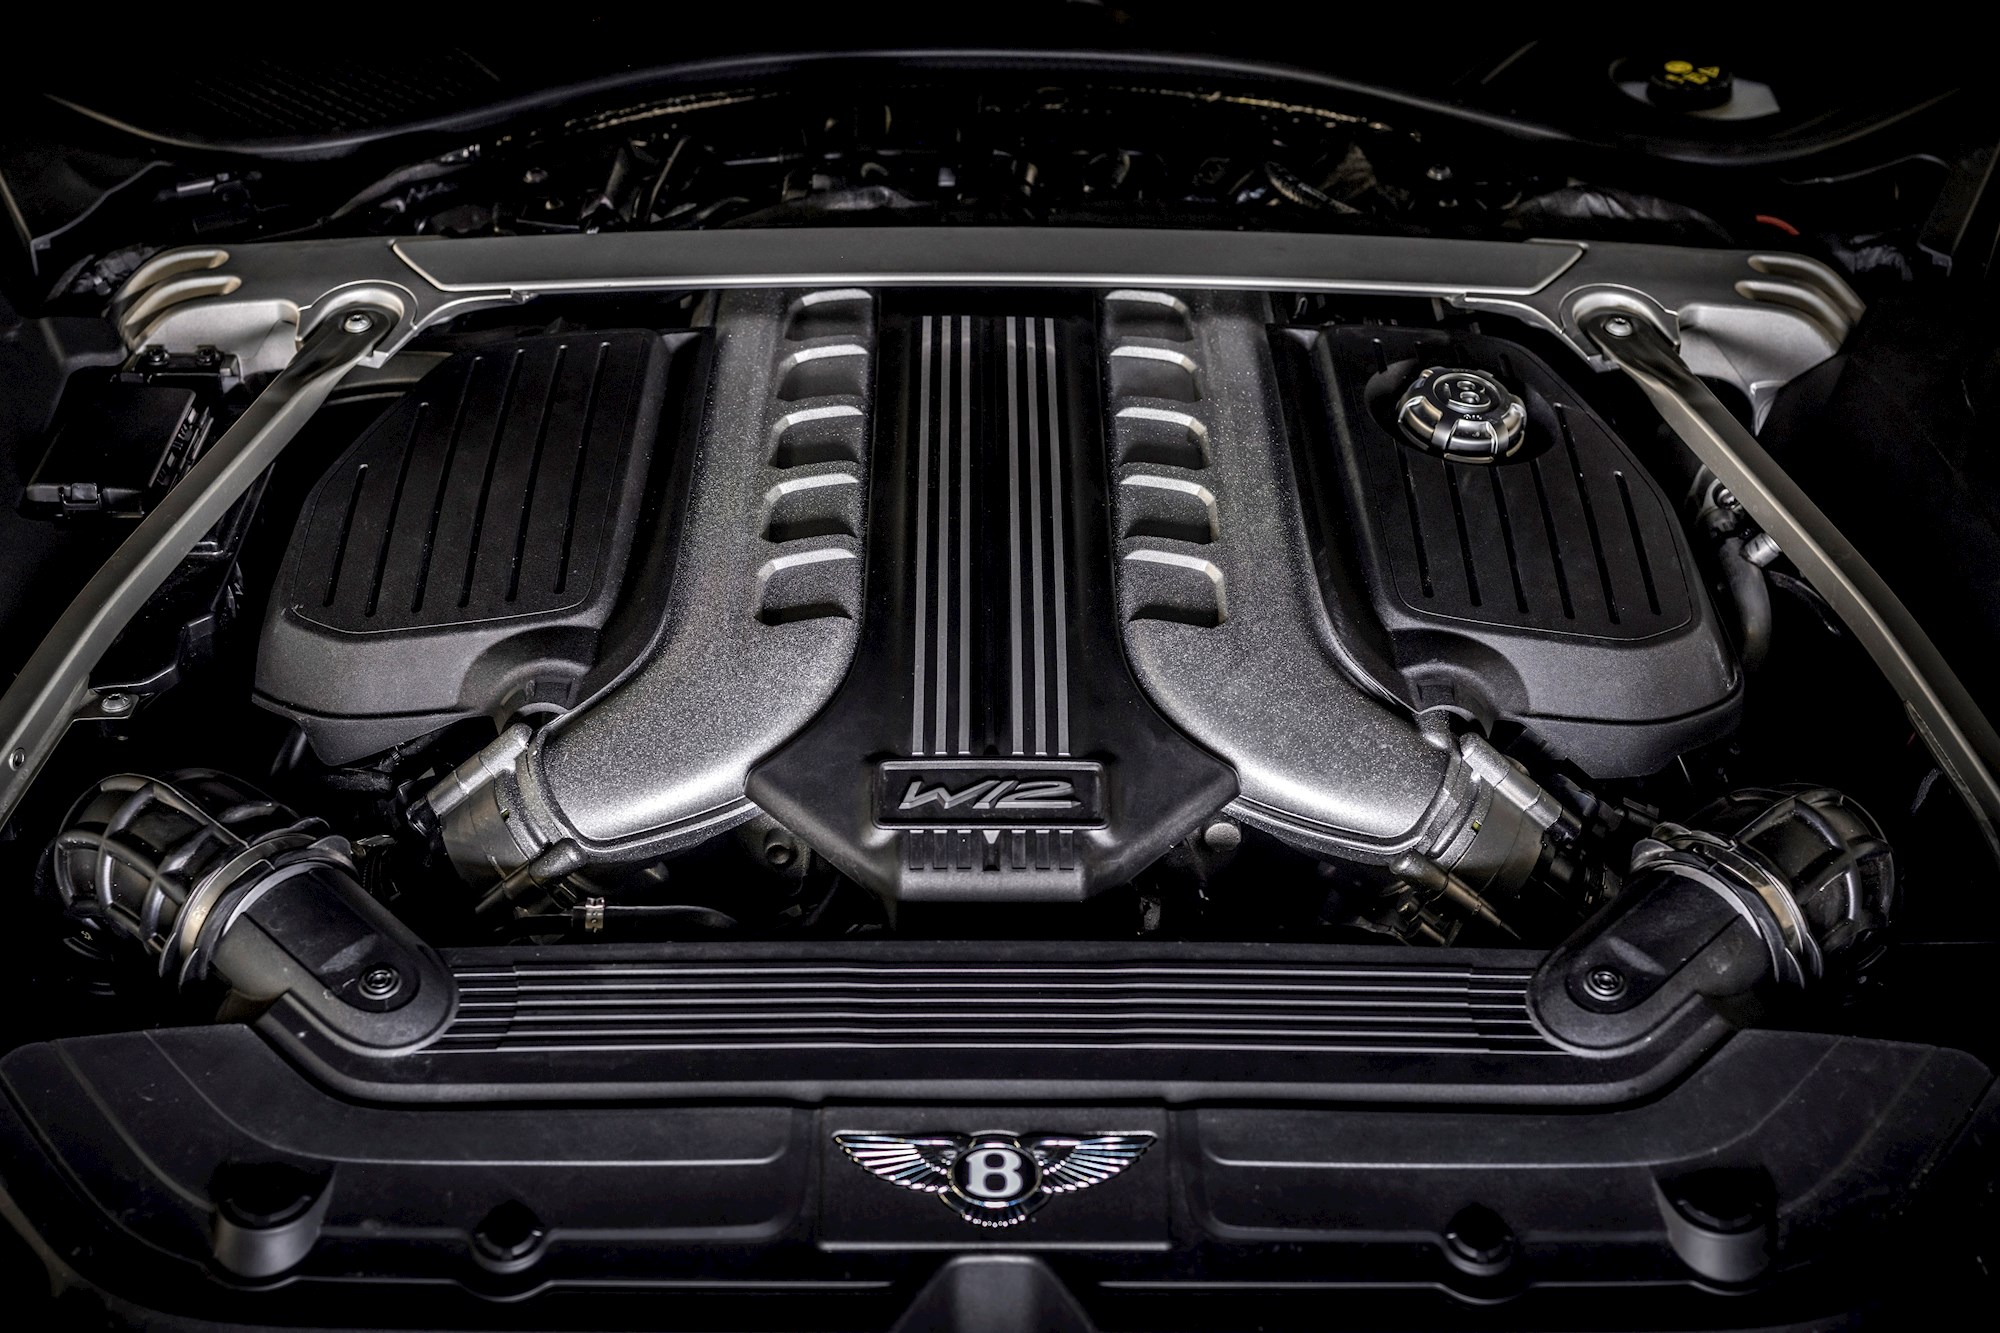 Bentley Creates Its Most Powerful W12 Engine Yet: This Is The Last-Ever Bentley W12 & Only 18 Will Be Produced